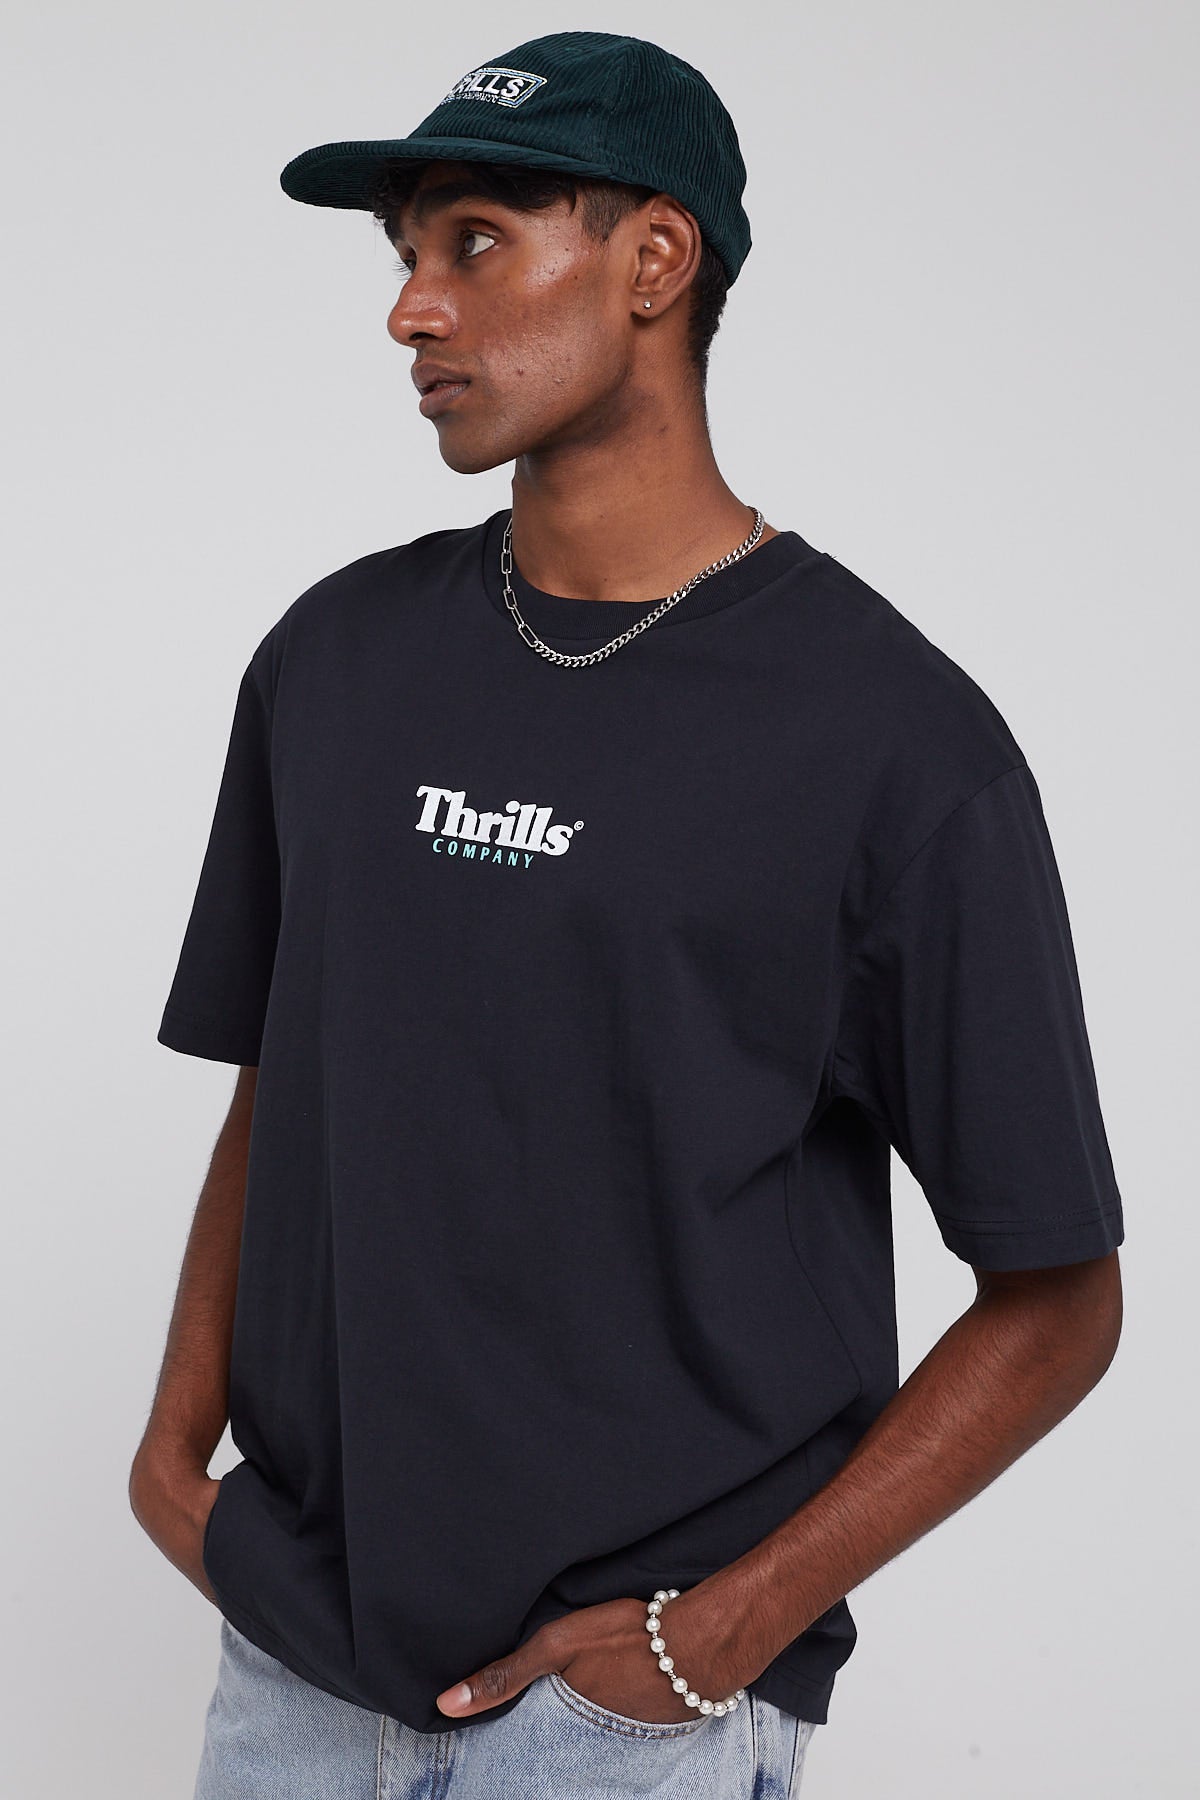 Thrills Definition Oversized Fit Tee Washed Black